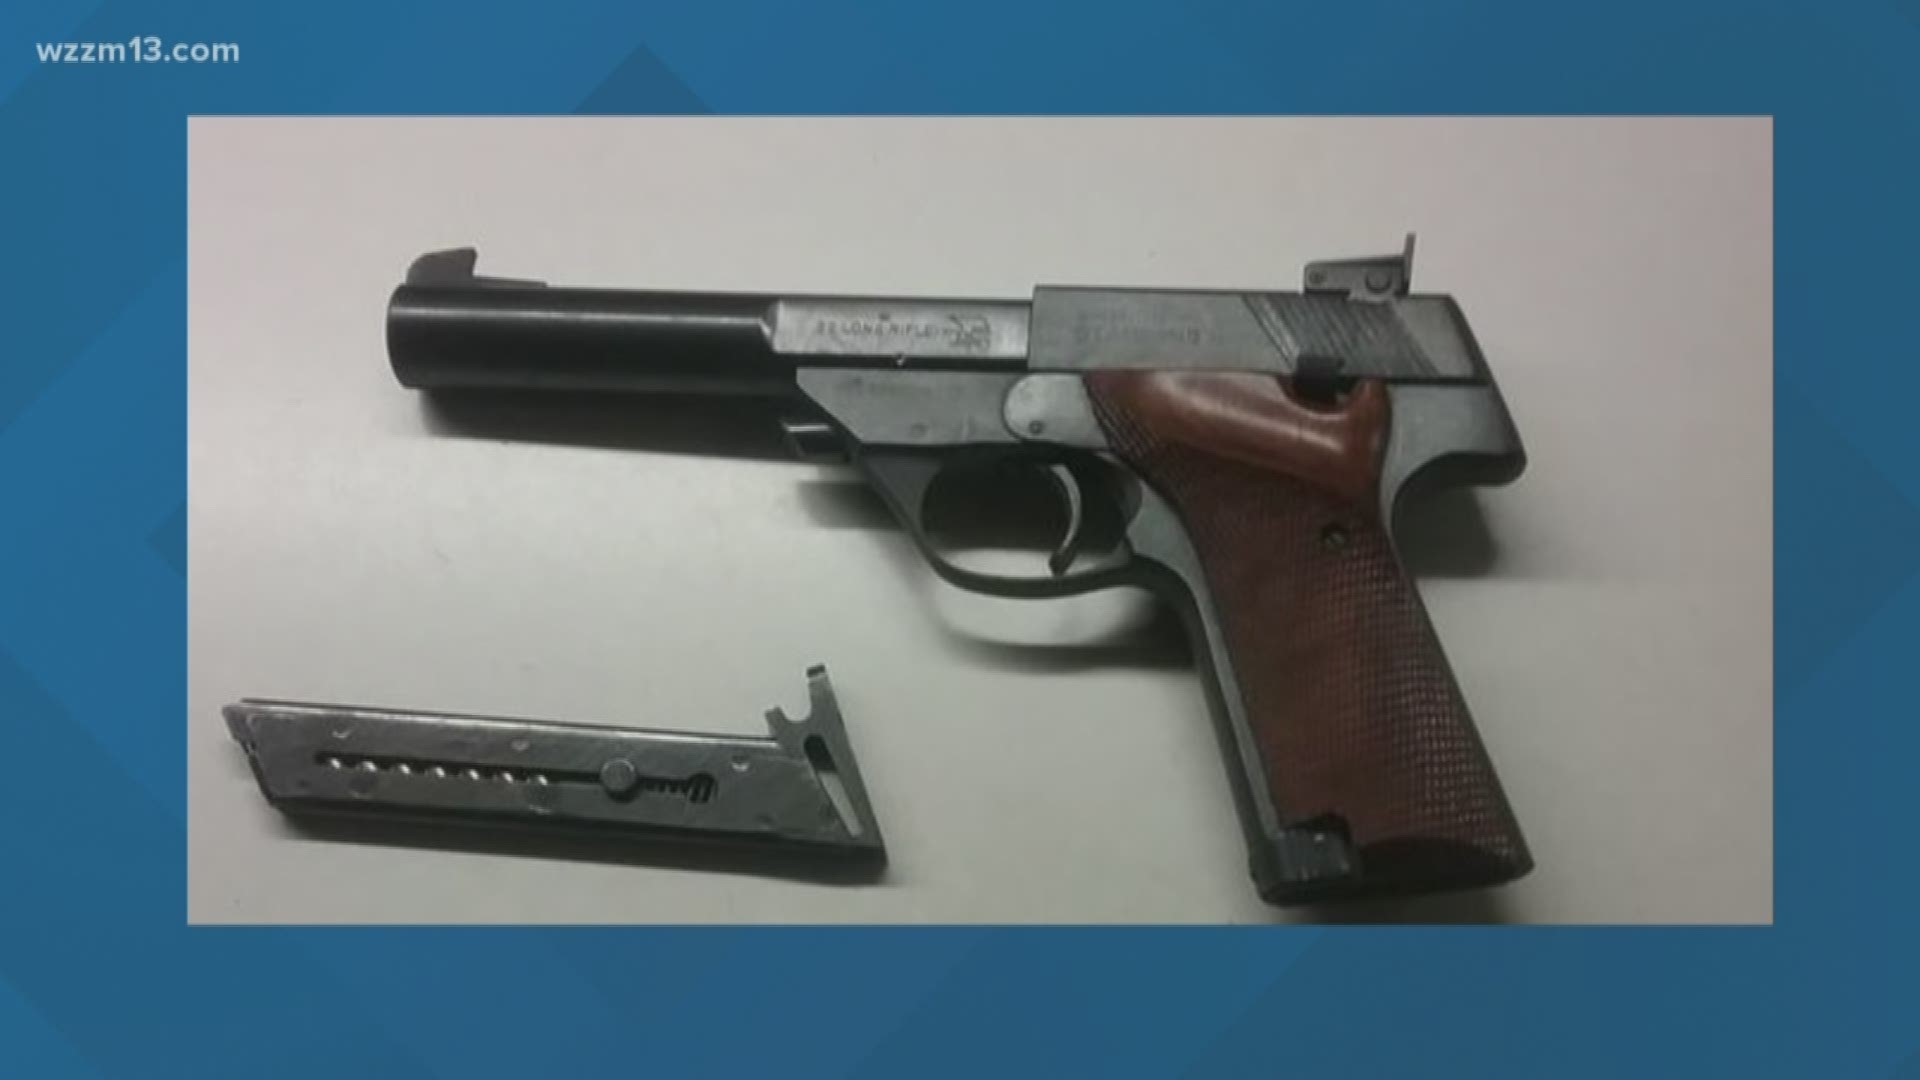 Loaded gun confiscated at the airport